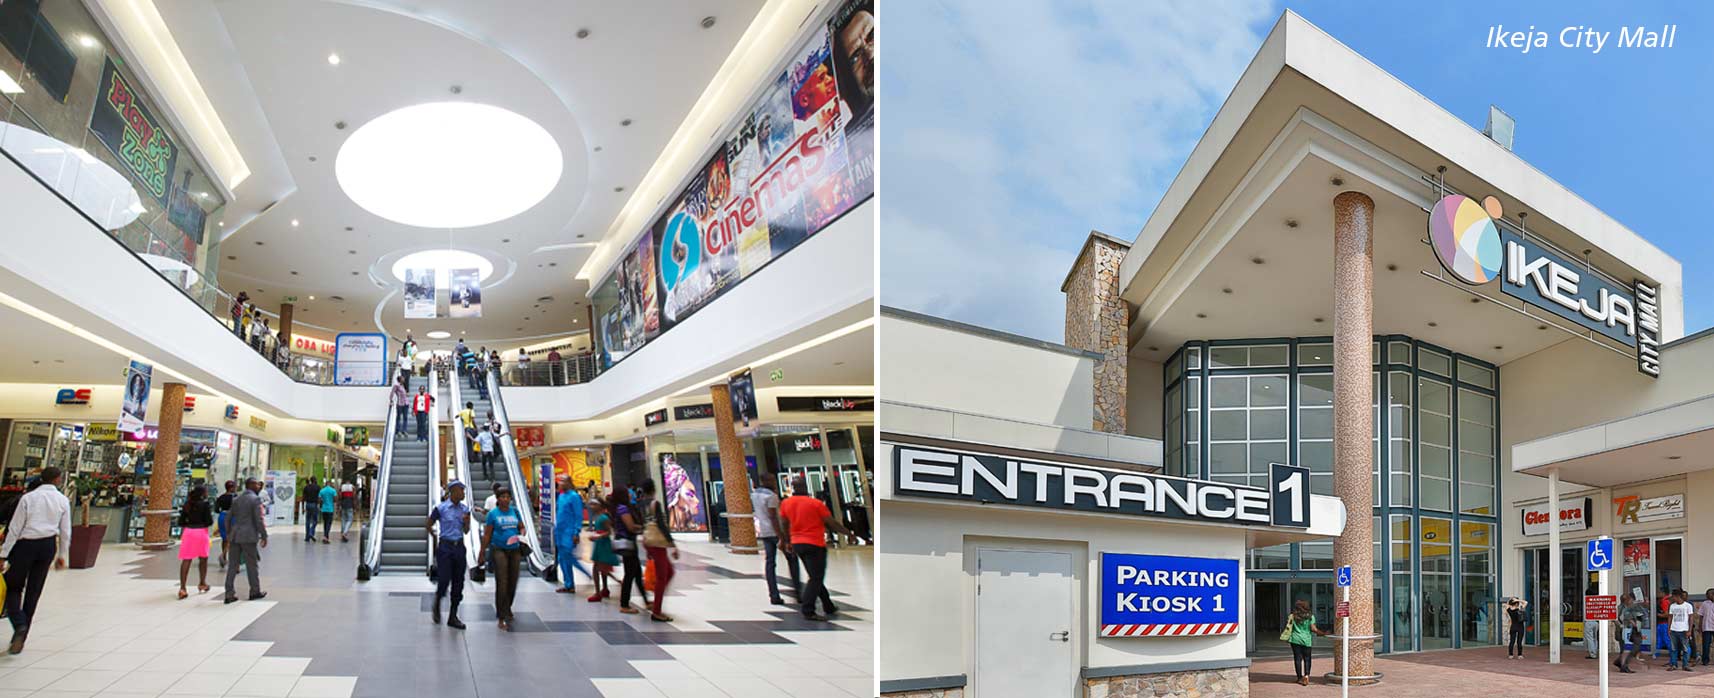 Nigeria’s Ikeja City Mall Sold to Hyprop and Attacq